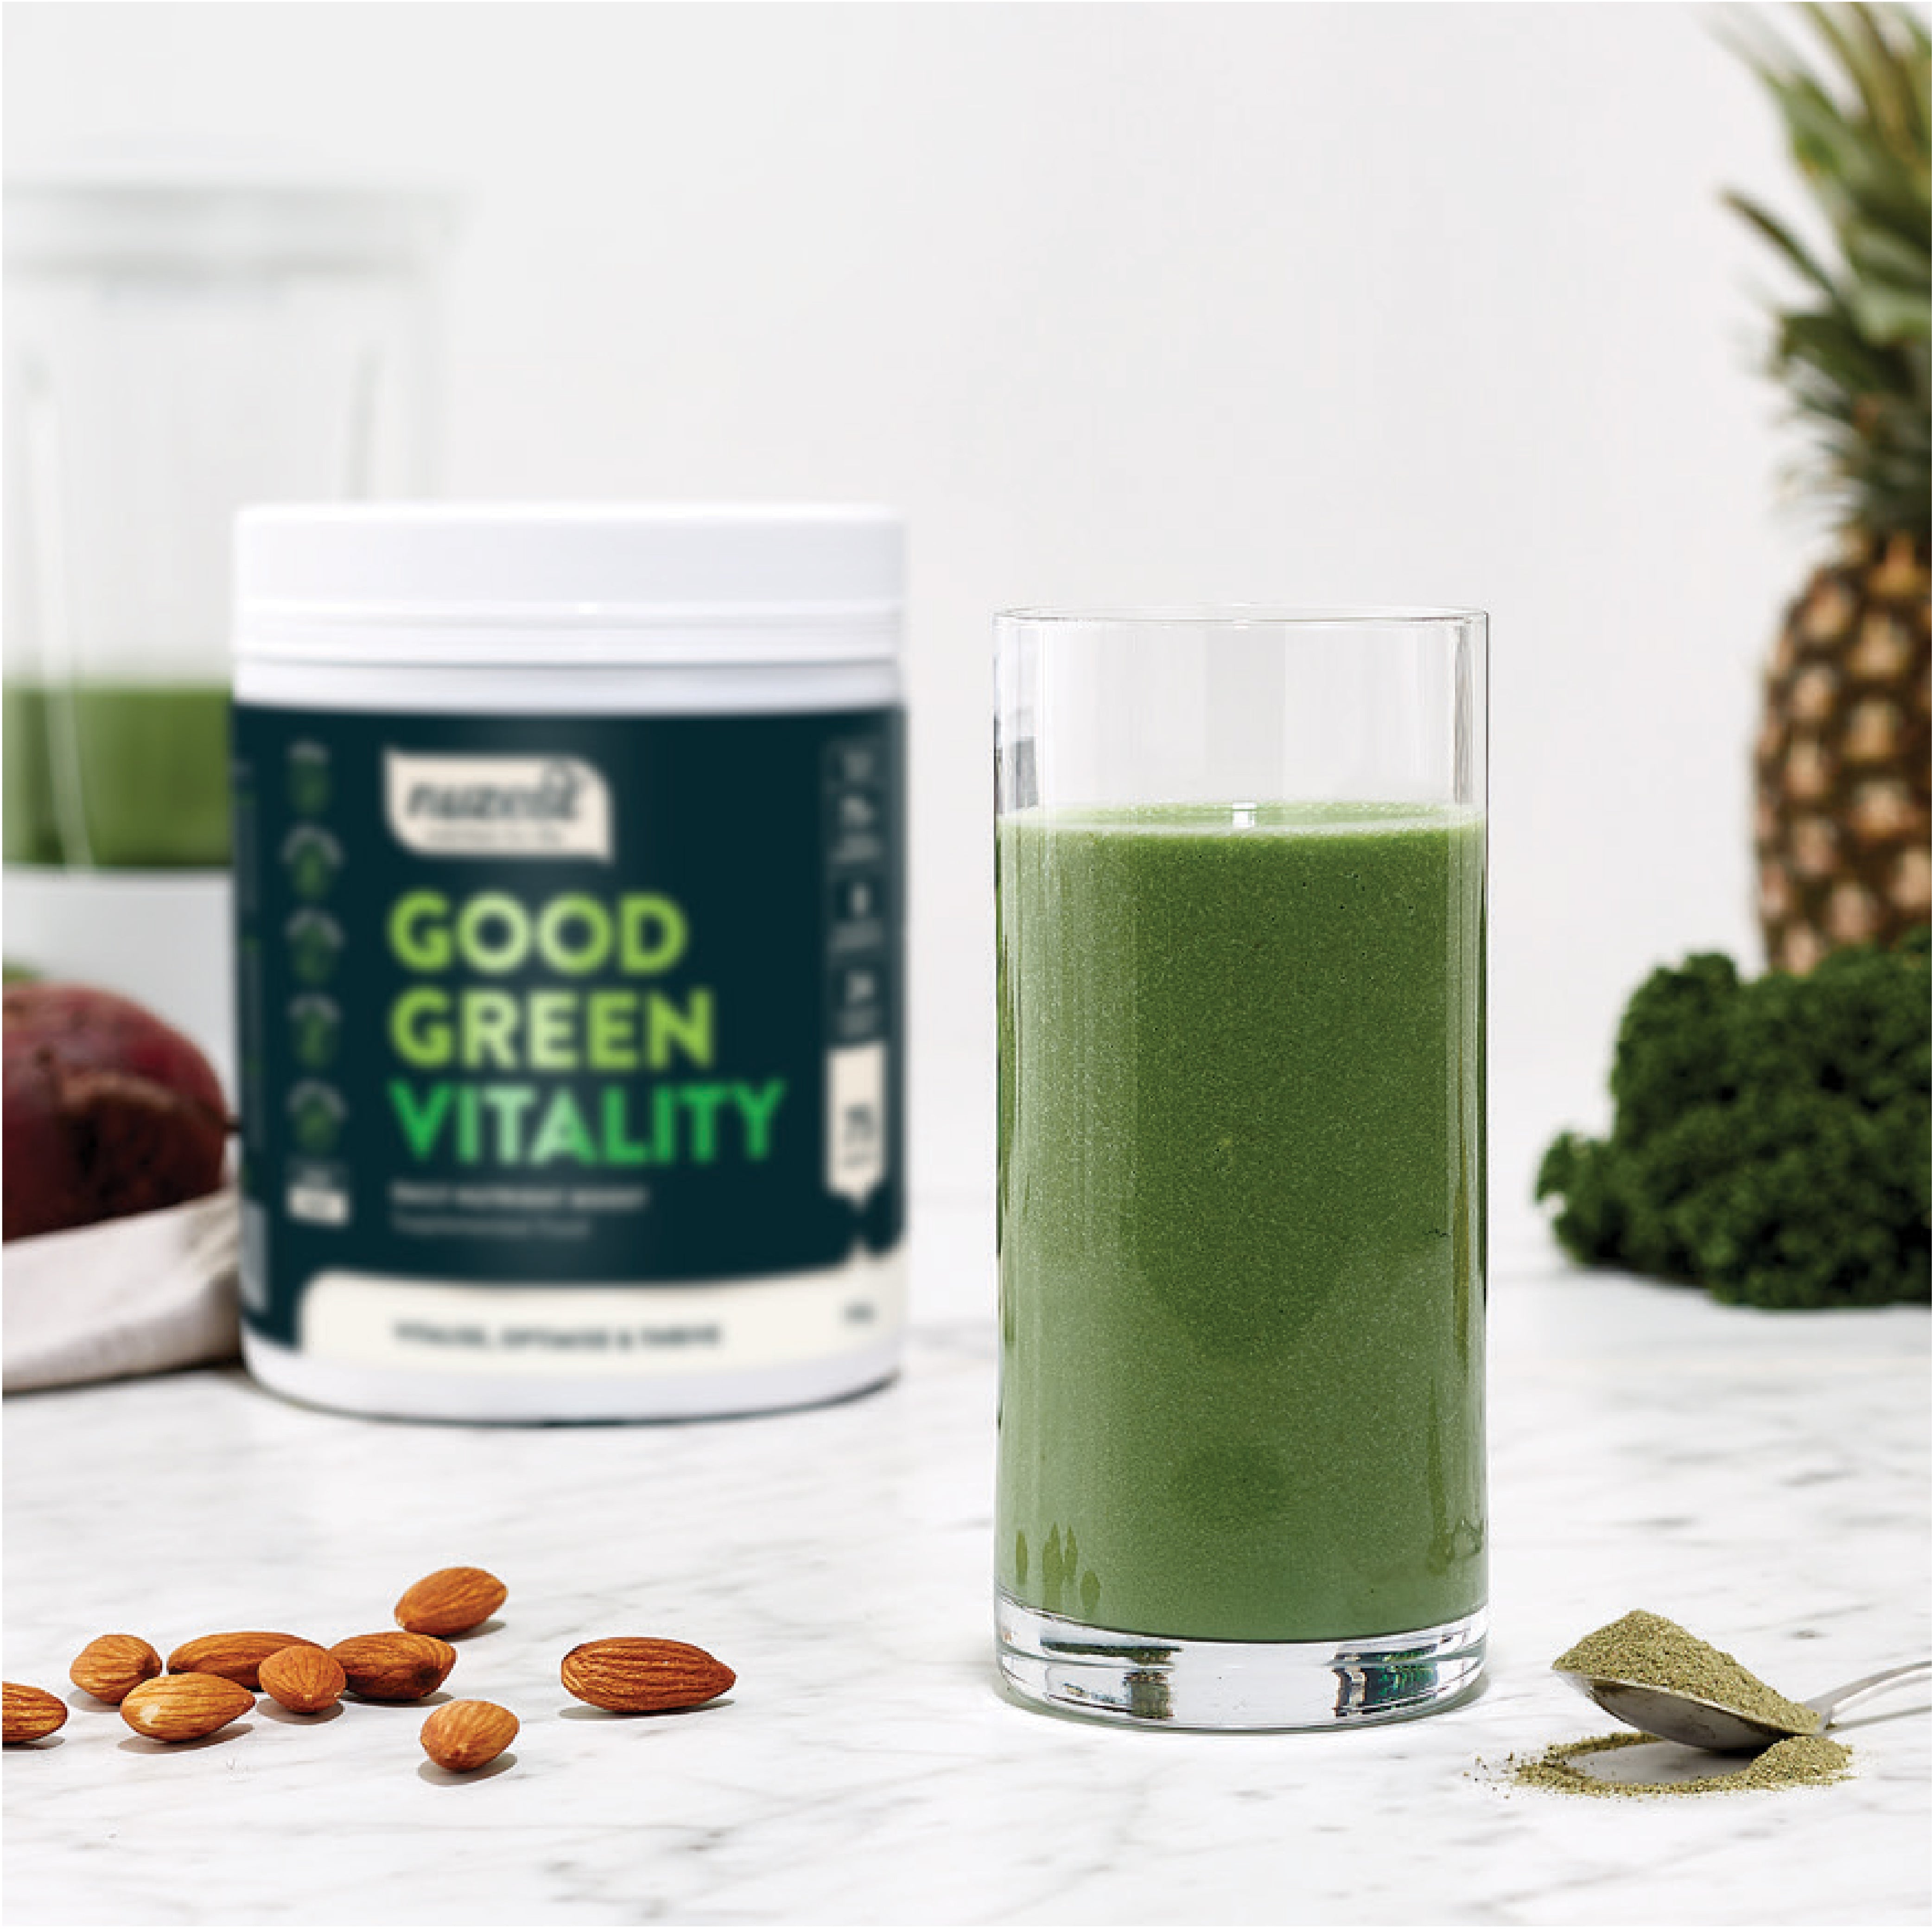 Nuzest Good Green Vitality Emerges As The Best Supplement In The 2021 Remix Lifestyle Awards